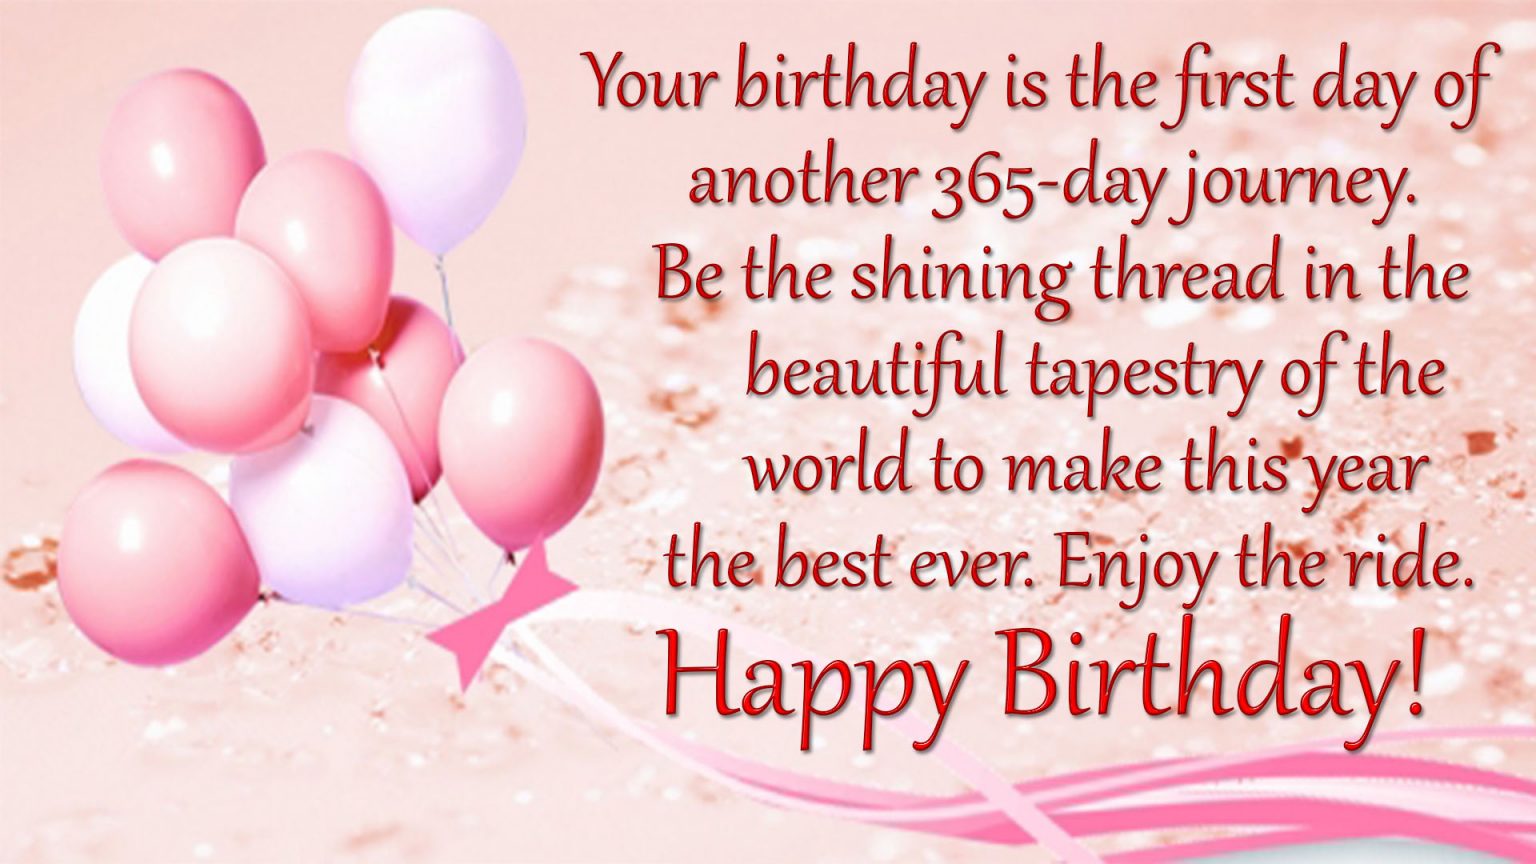 100 Happy Birthday Quotes, Wishes, Greetings & Messages